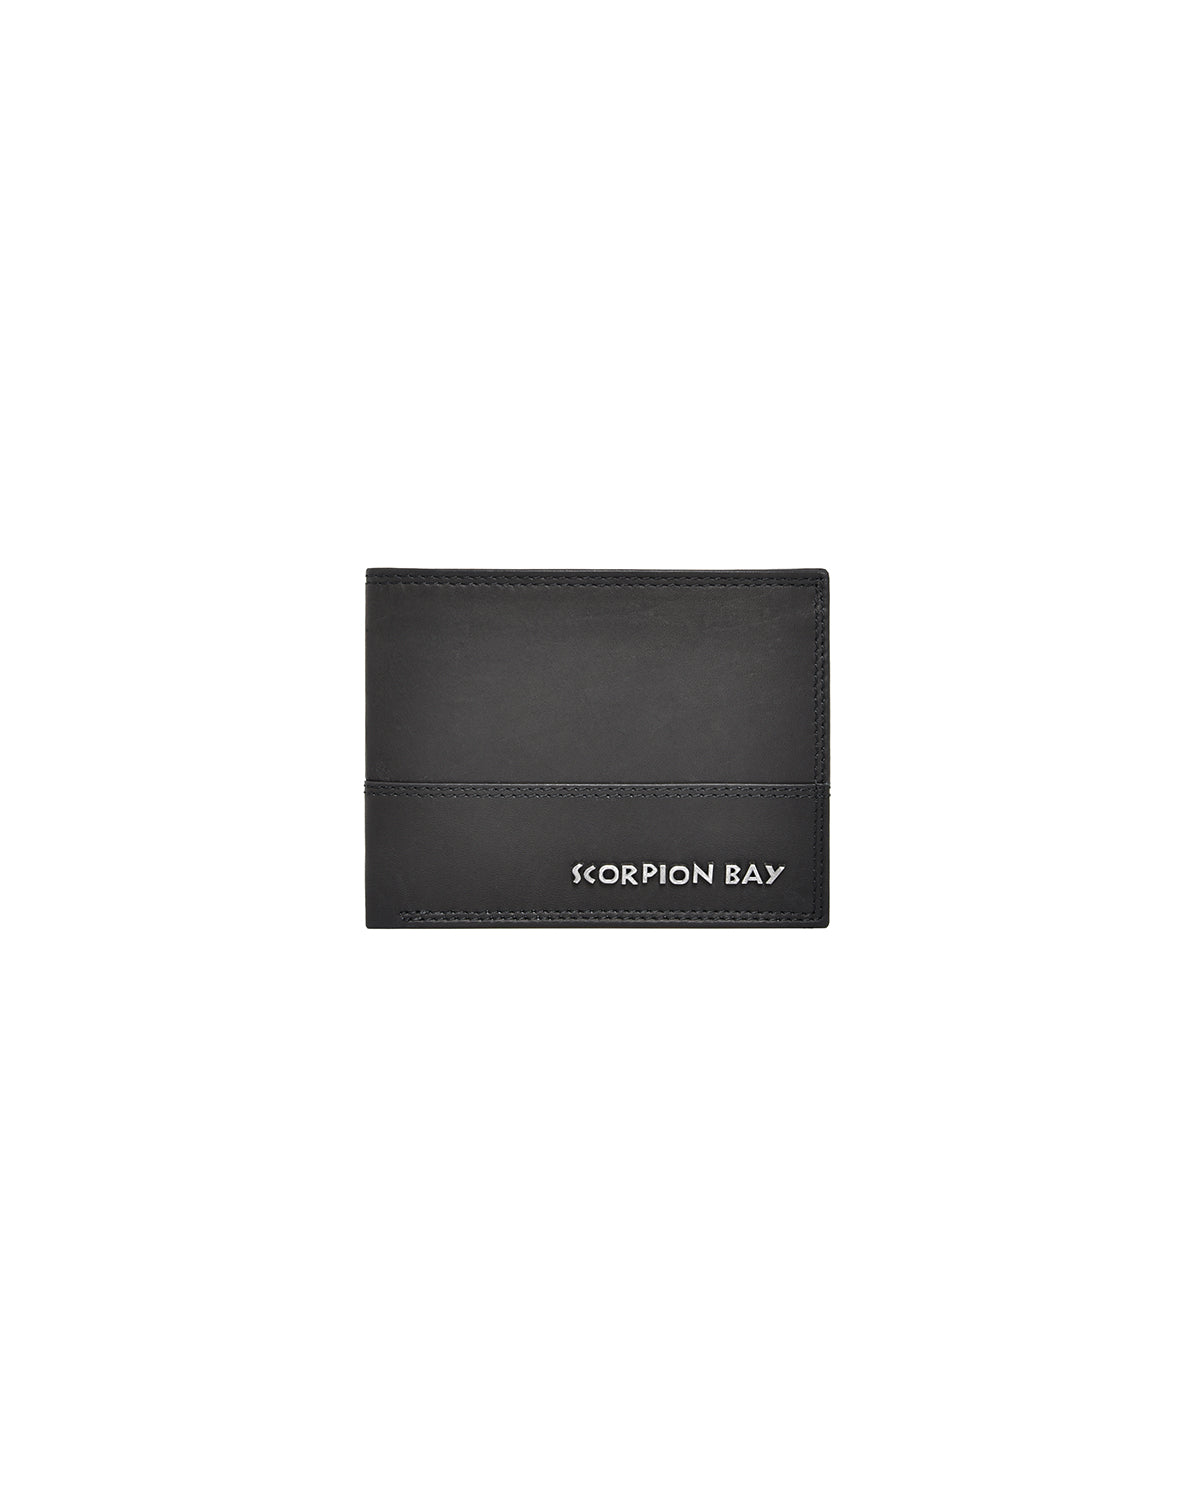 Black Leather Wallet With Riveted Lettering Logo